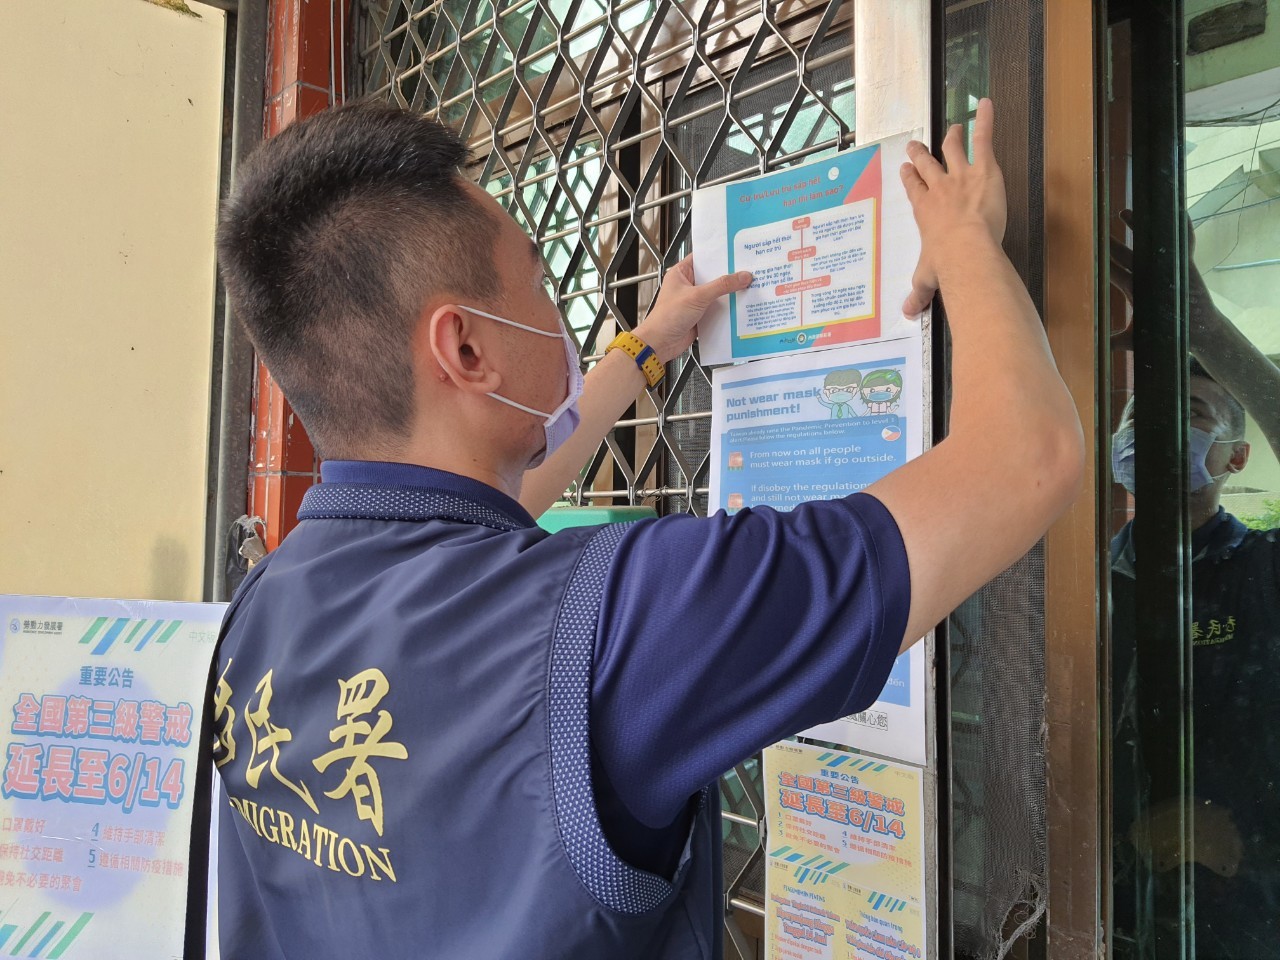 The National Immigration Agency Chiayi Country Brigade puts up a multi-lingual poster at the entrance of the migrant workers’ dormitory with the Covid-19 level 3 alert extension and other Covid-19 prevention measures. Photo/Provided by National Immigration Department Chiayi Service Station